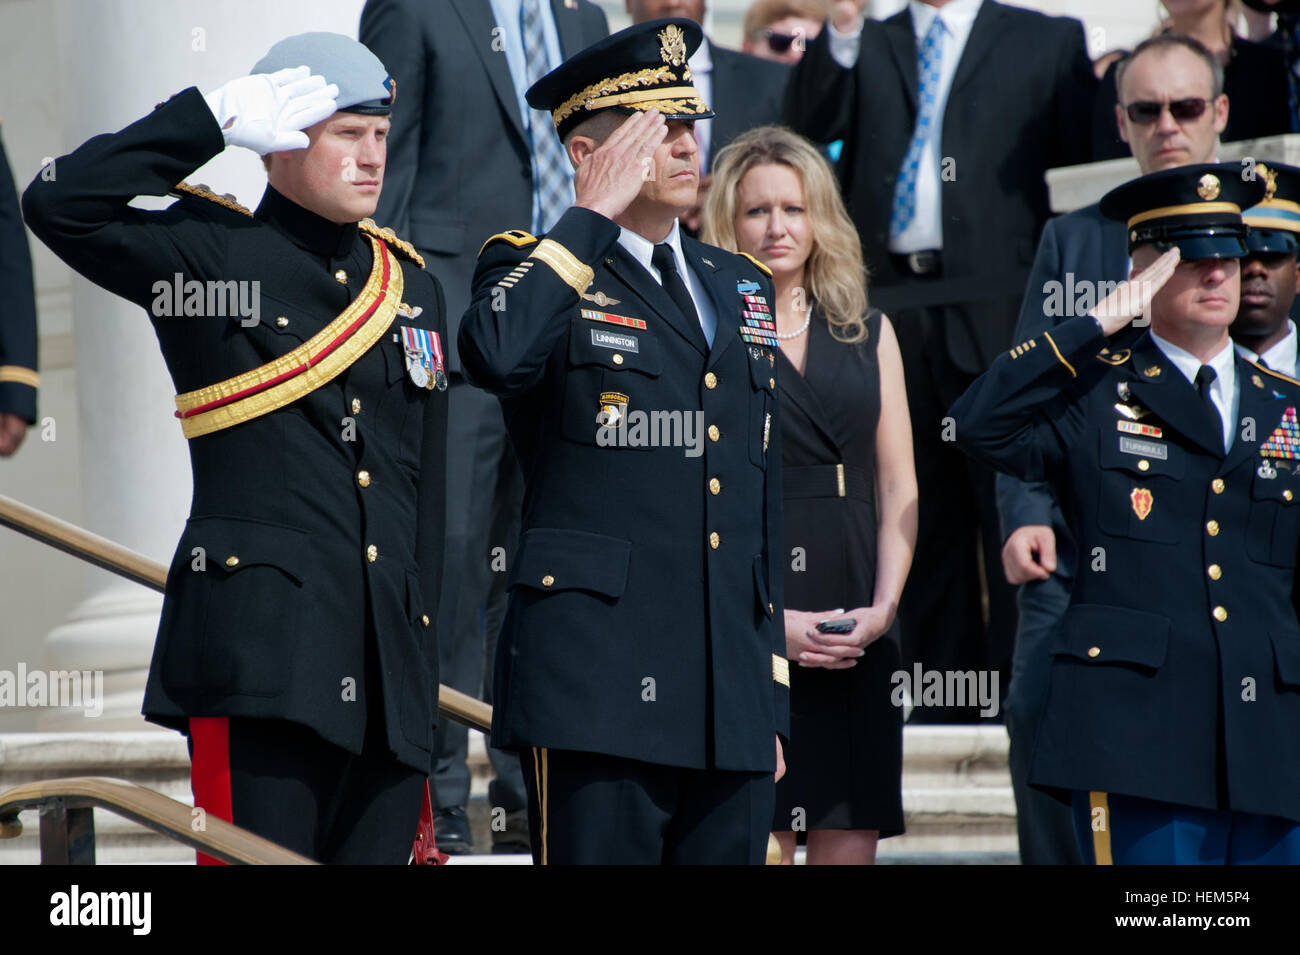 British Royal Army Captain (Prince) Harry Wales, and Maj. Gen. Michael S. Linnington, Military District of Washington Commander, salute during the playing of the British and American national anthems at the Tomb of the Unknowns in Arlington National Cemetery, Va., May 10, 2013. (U.S. Army Photo by Sgt. Laura Buchta/Released) Prince Harry of Wales Arlington visit 130510-A-VS818-300 Stock Photo